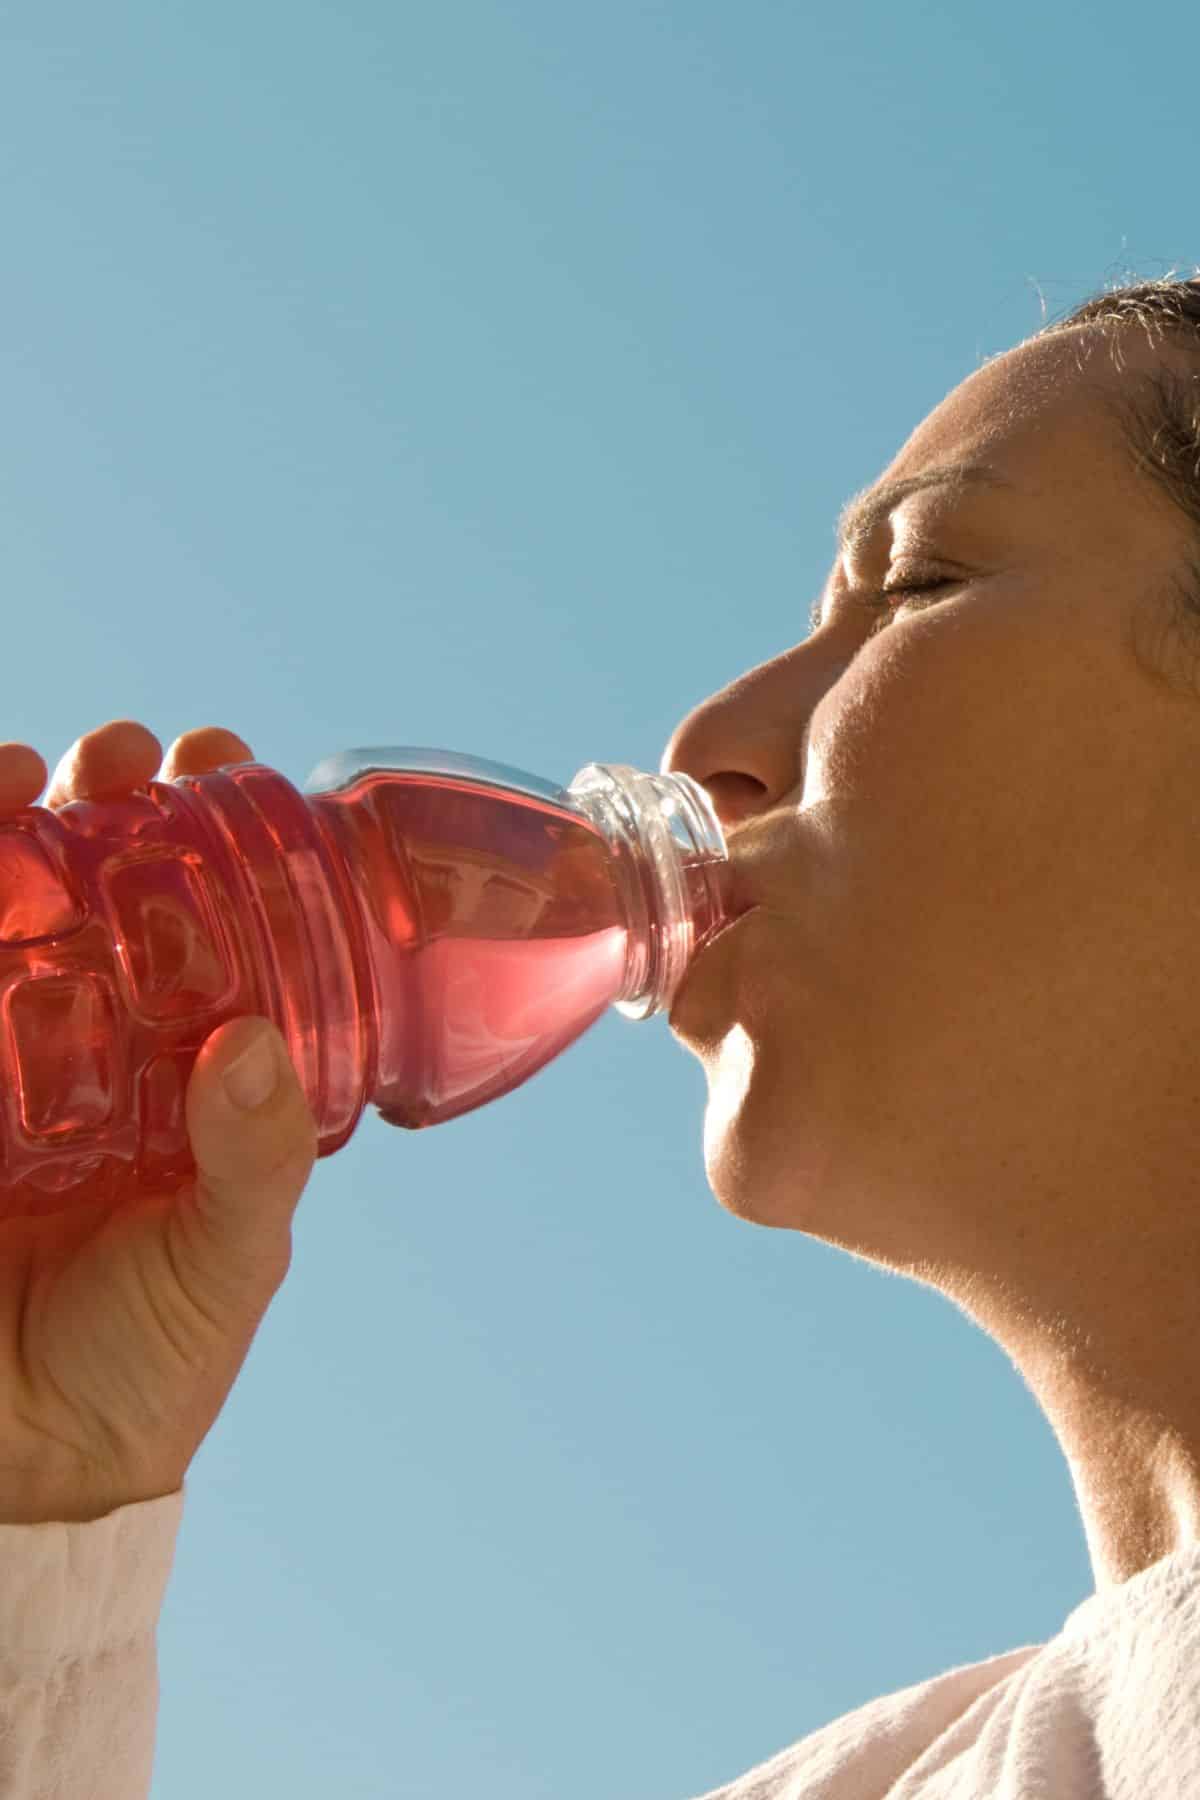 a woman drinking out of a Gatorade bottle.